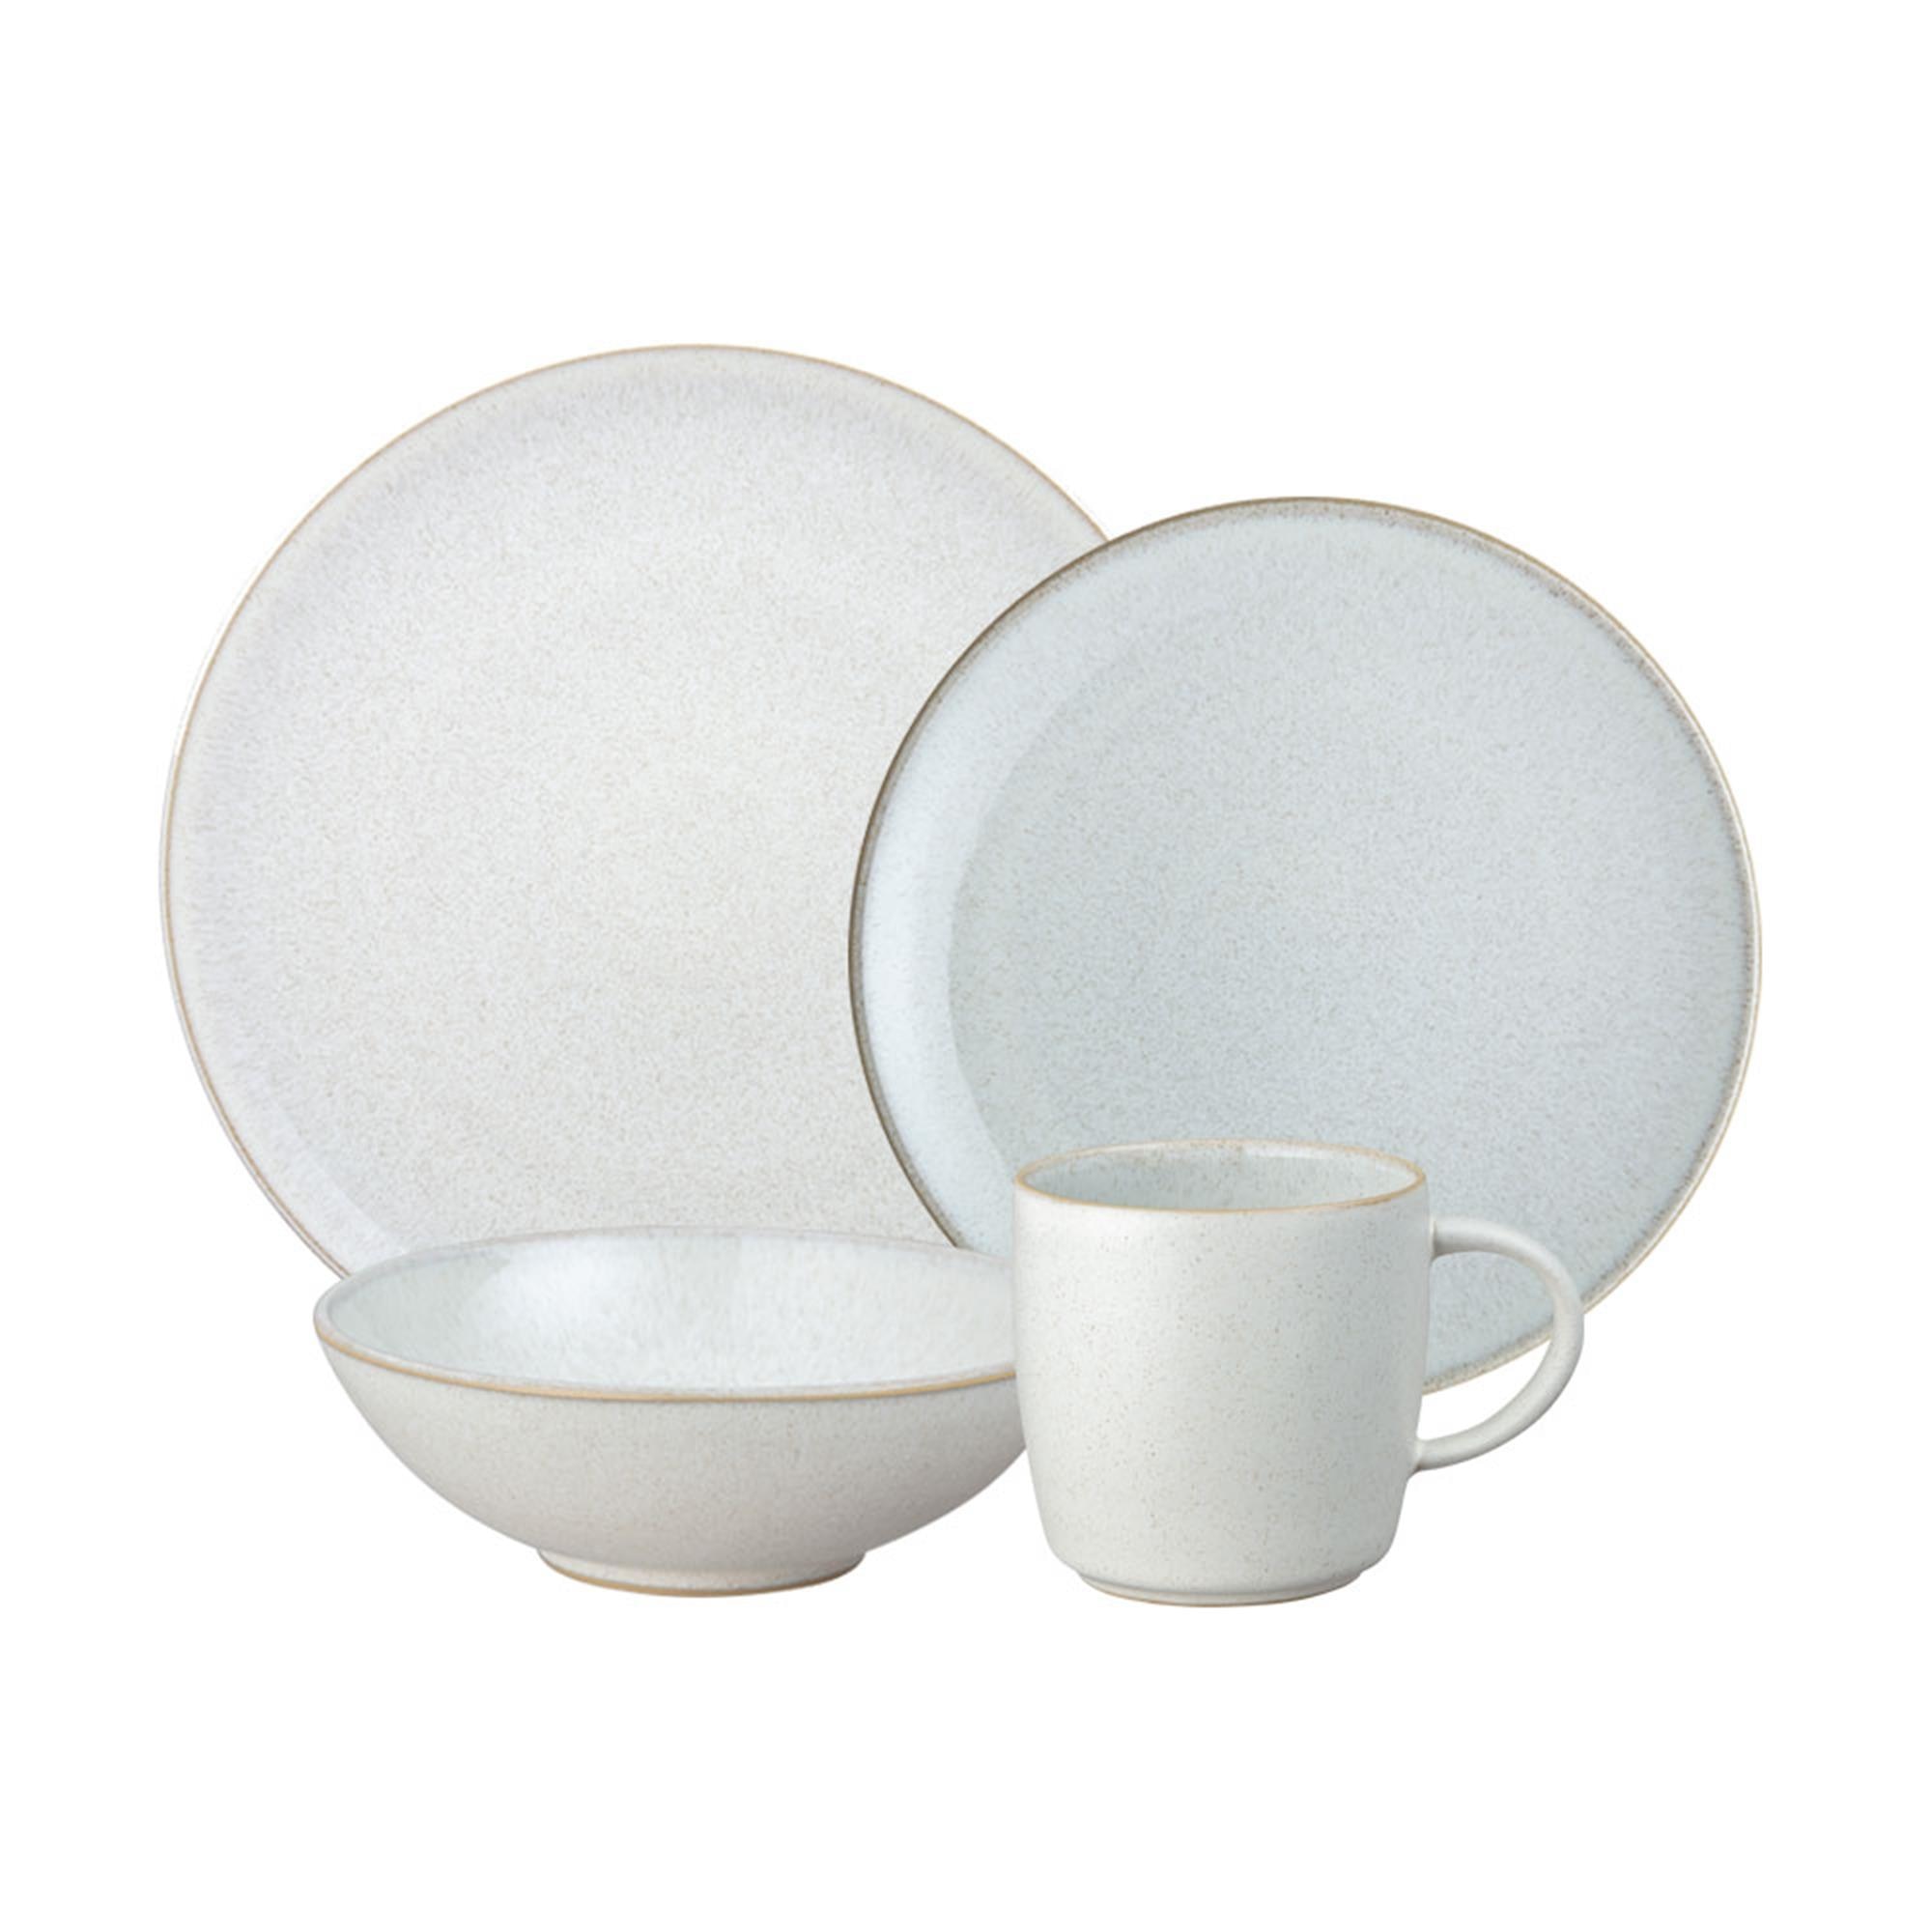 Service for 1 China by Denby 4-piece Place Setting 